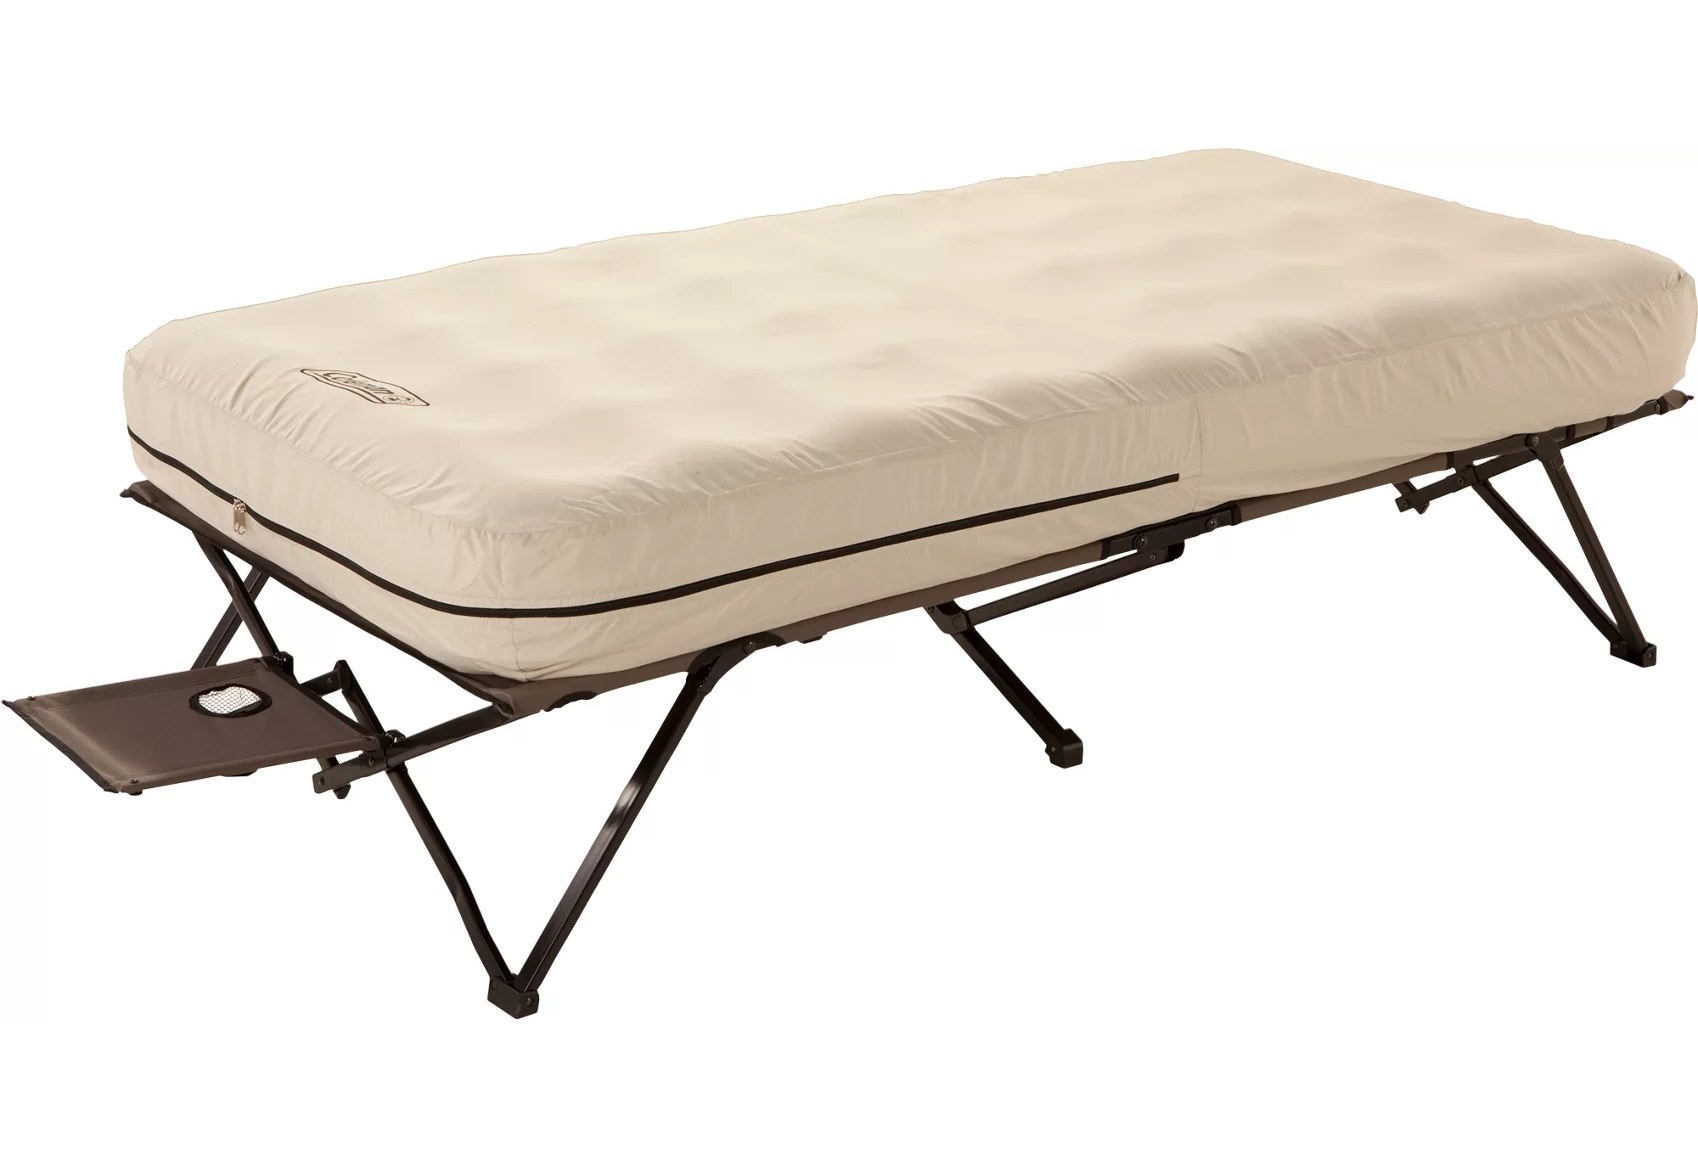 The cot with blown up airbed and side tray